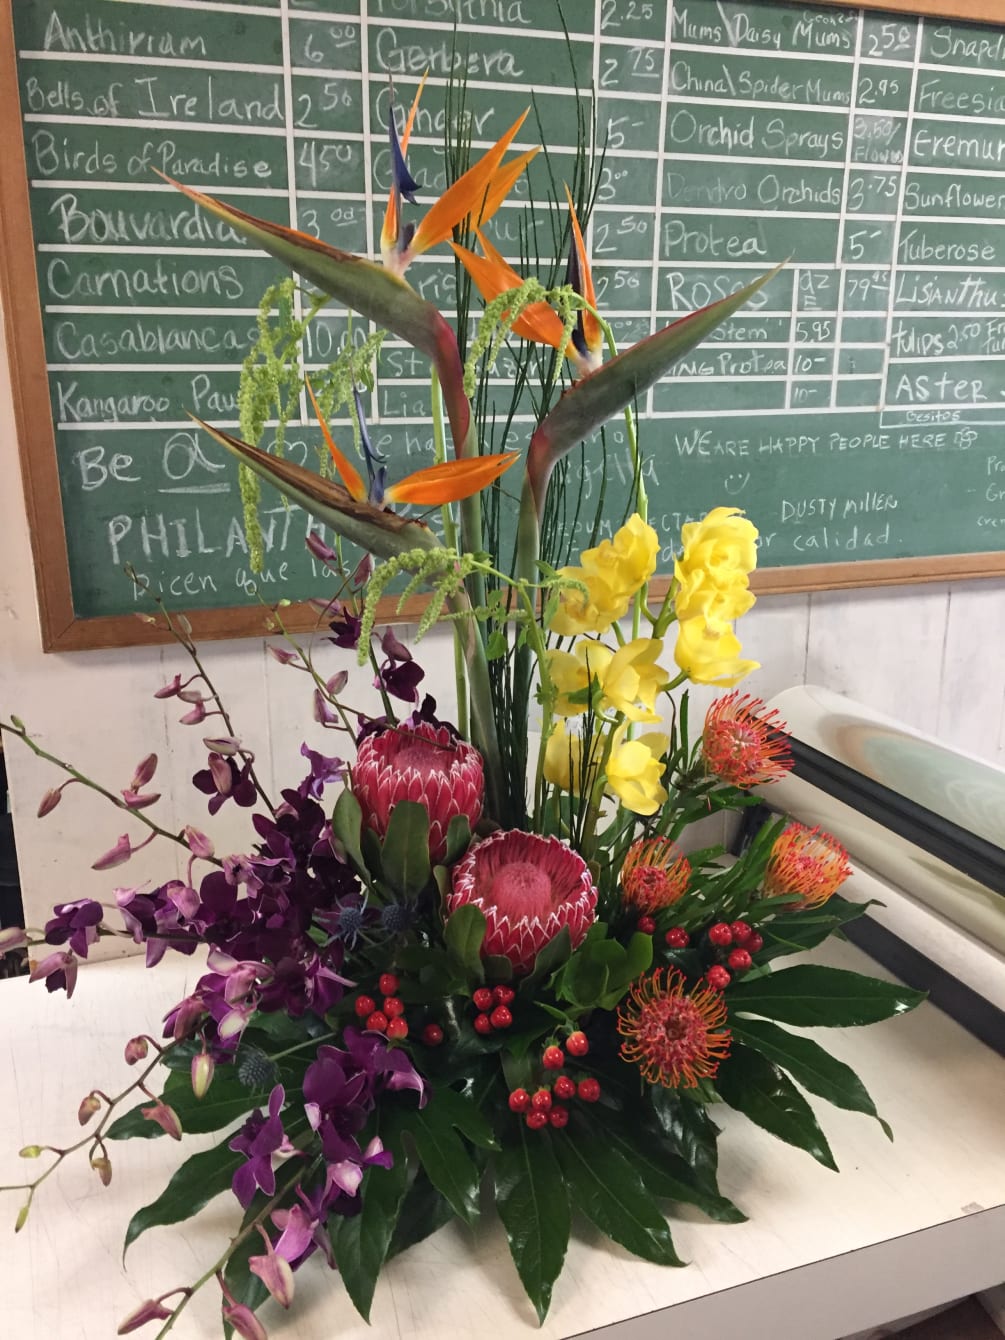 Exotic floral arrangement with orchids, birds of paradise, and protea. 